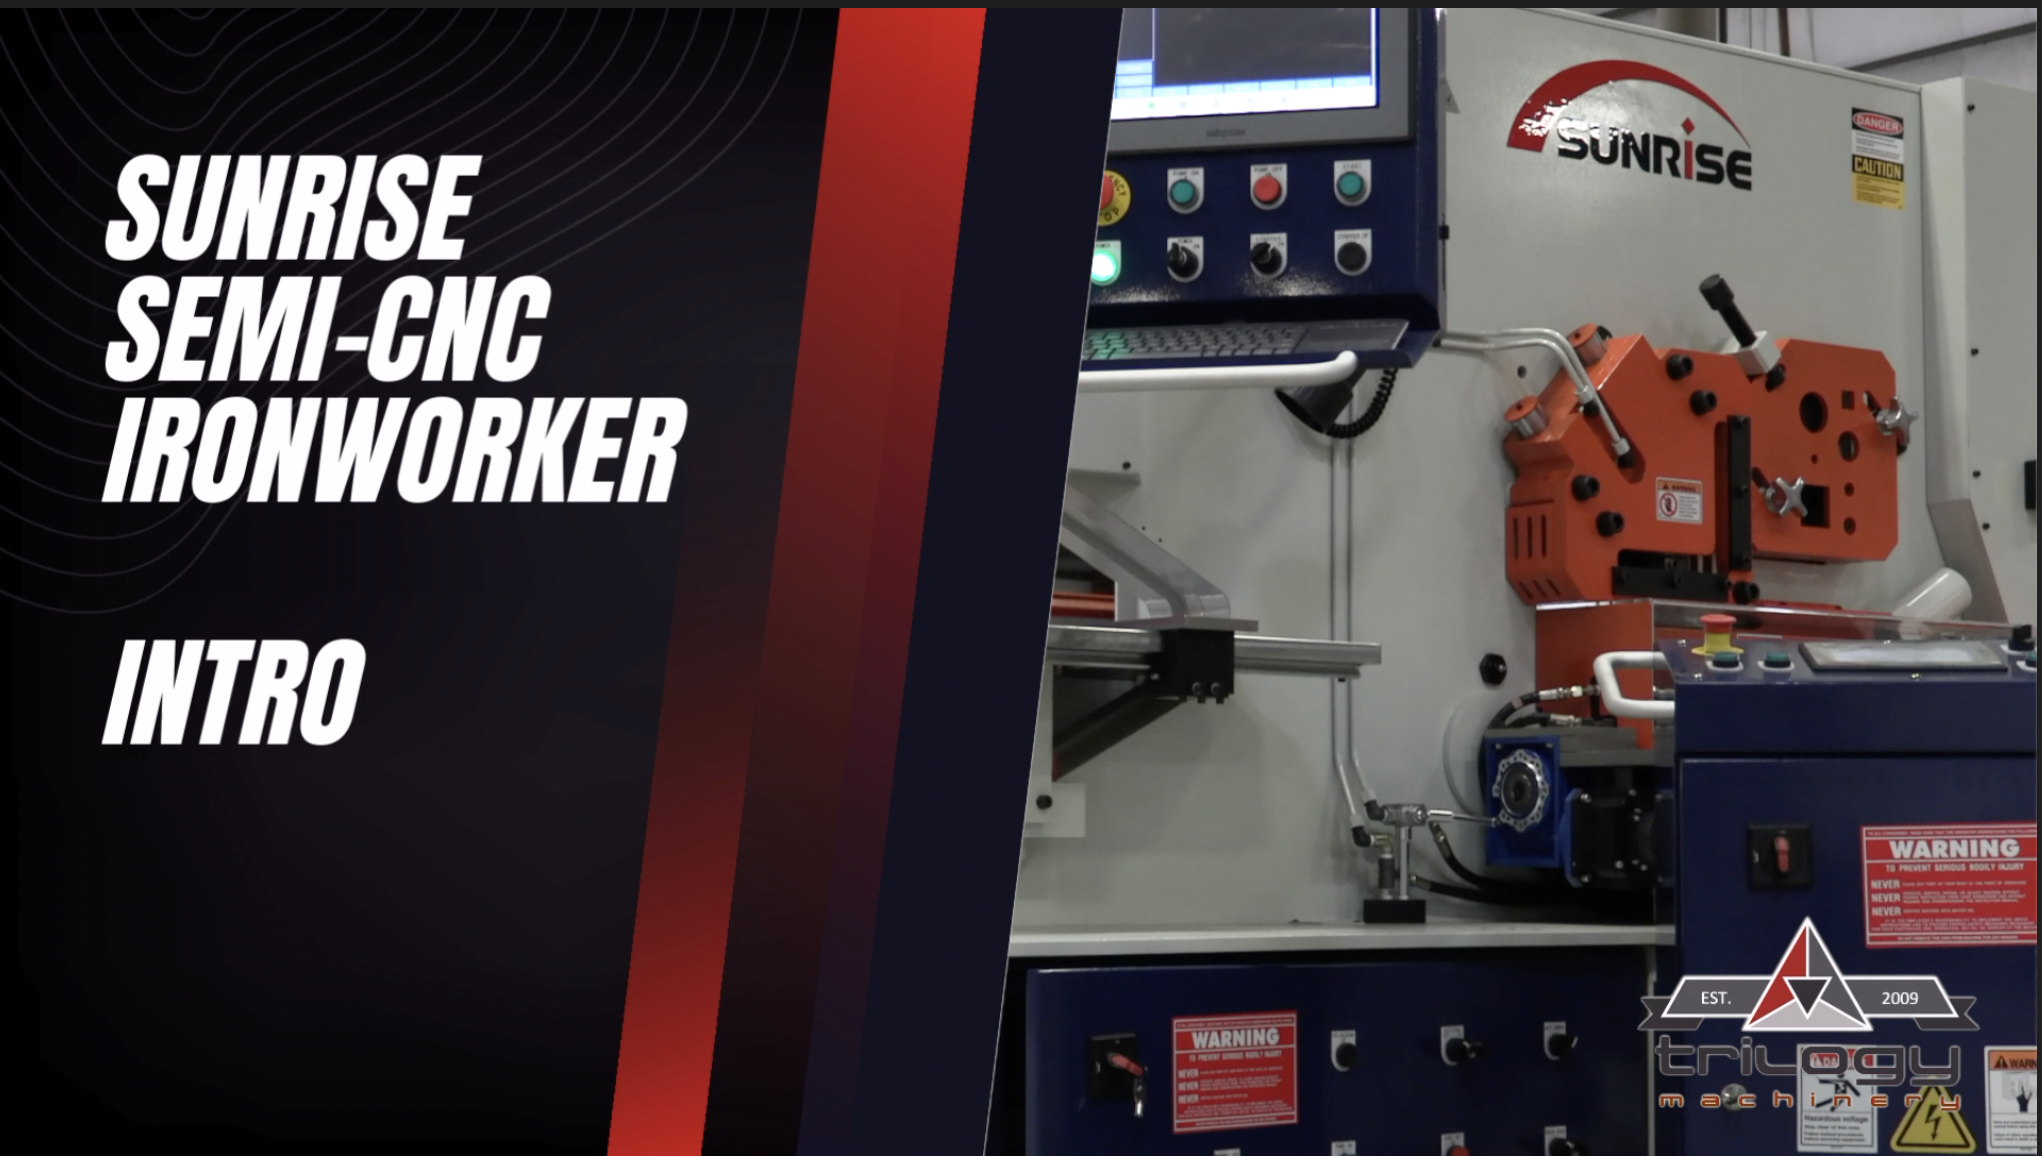 Sunrise CNC Ironworker Overview and Walk-Around Tour